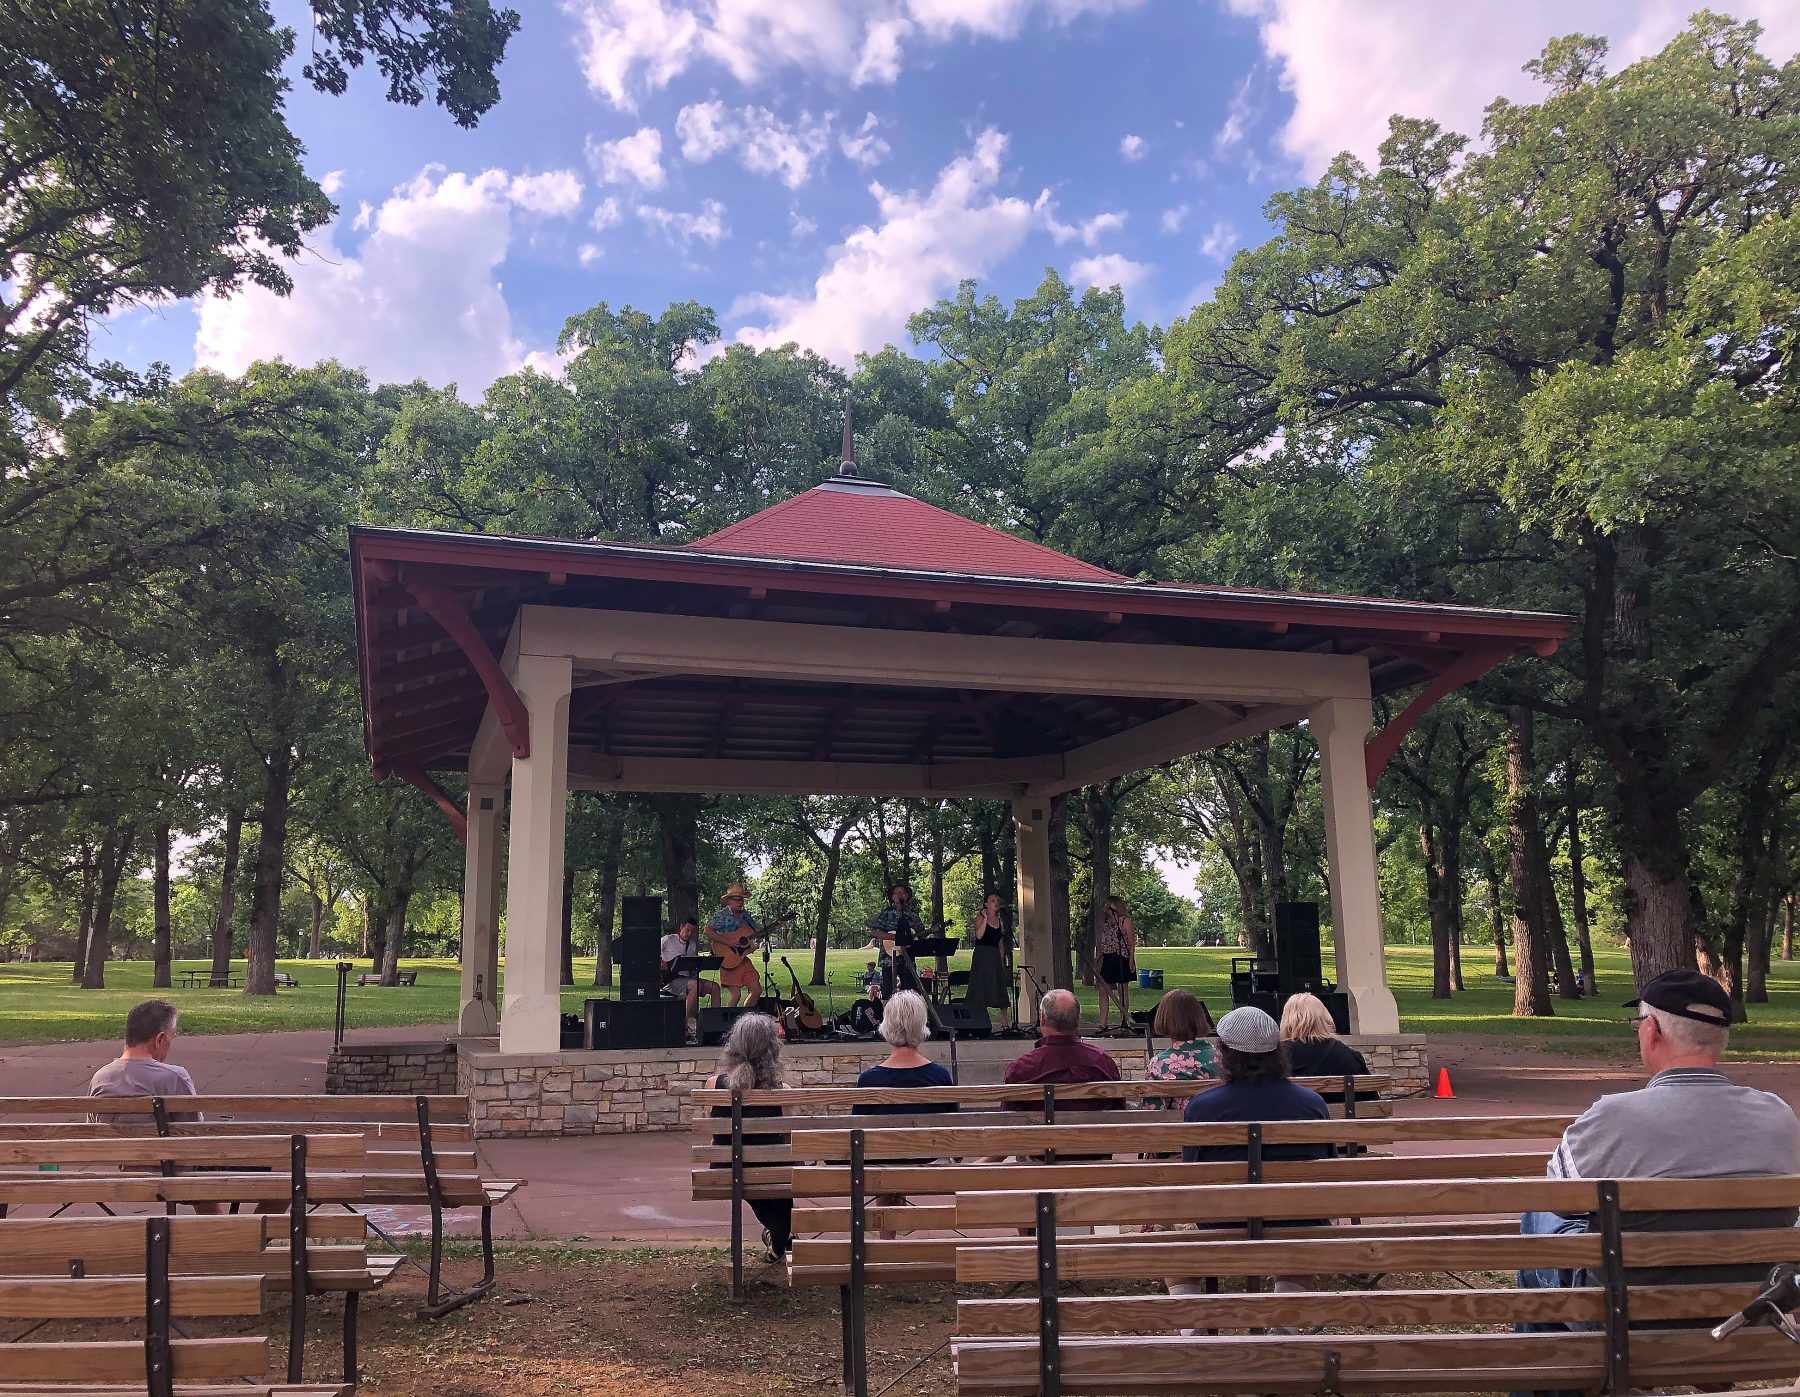 The band Sonic Love Child performs at the gazebo of Minnehaha Park